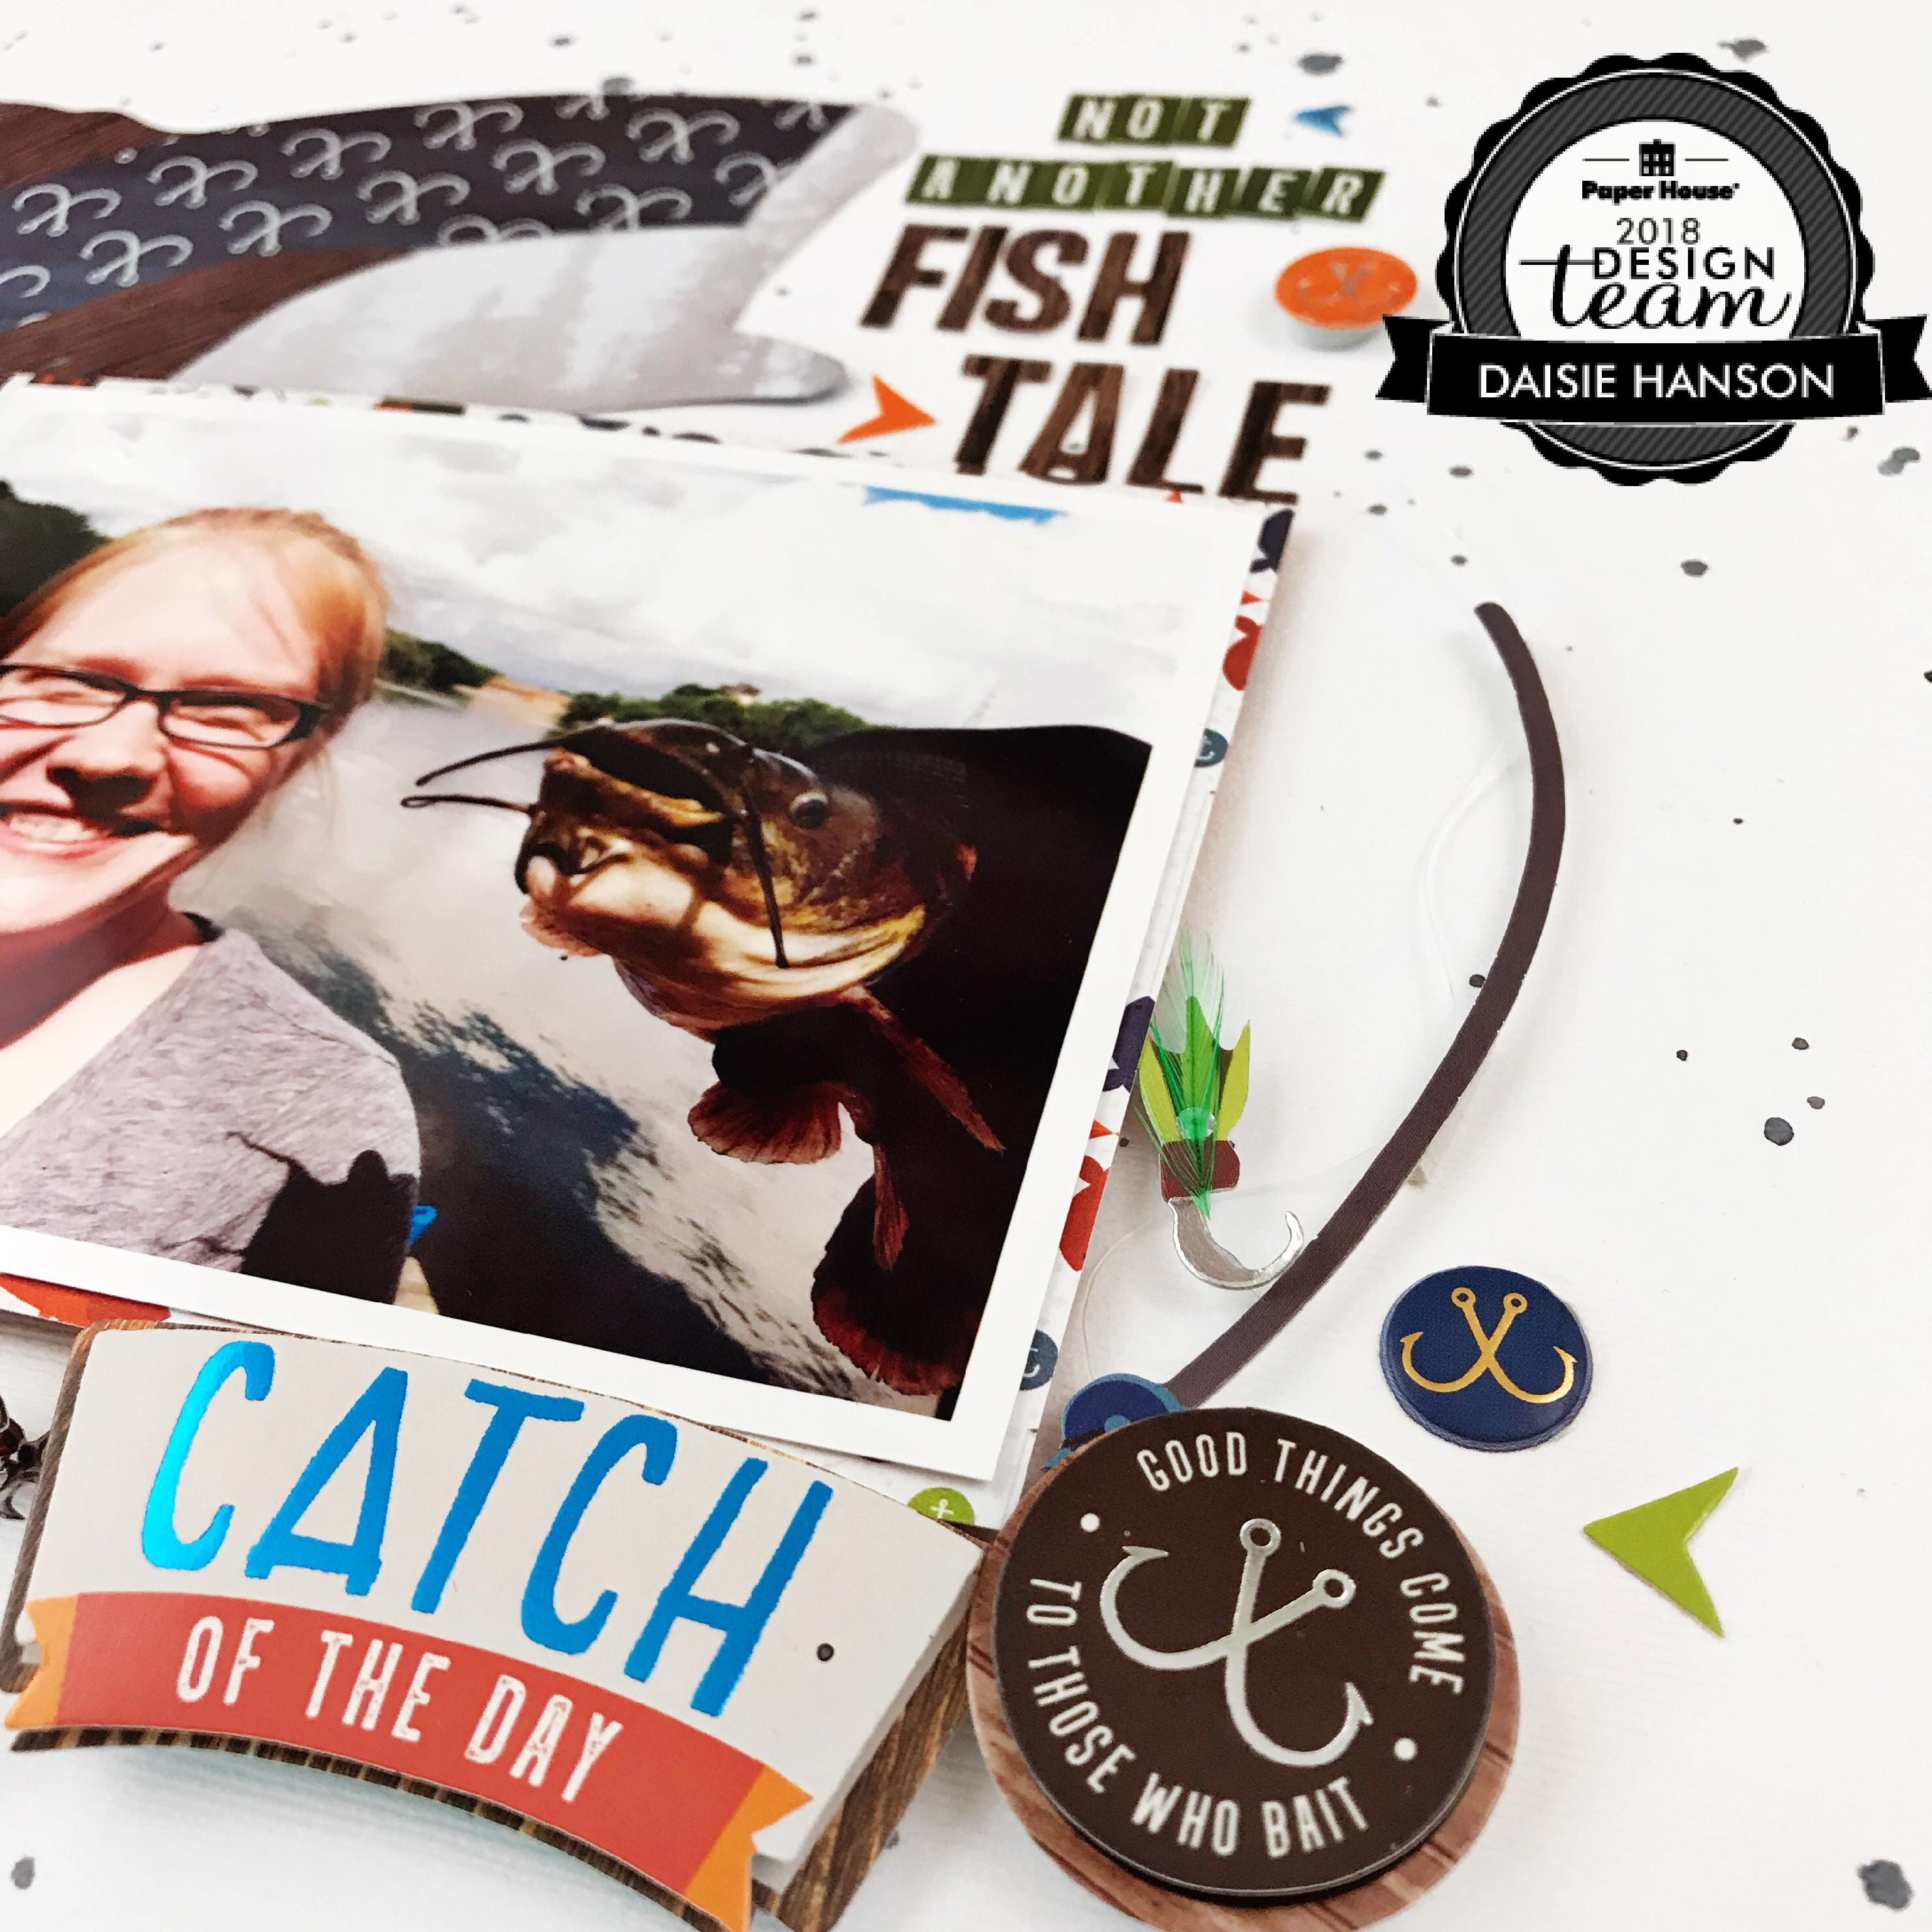 Scrapbook layout documenting fish tales using the Great Outdoors collection